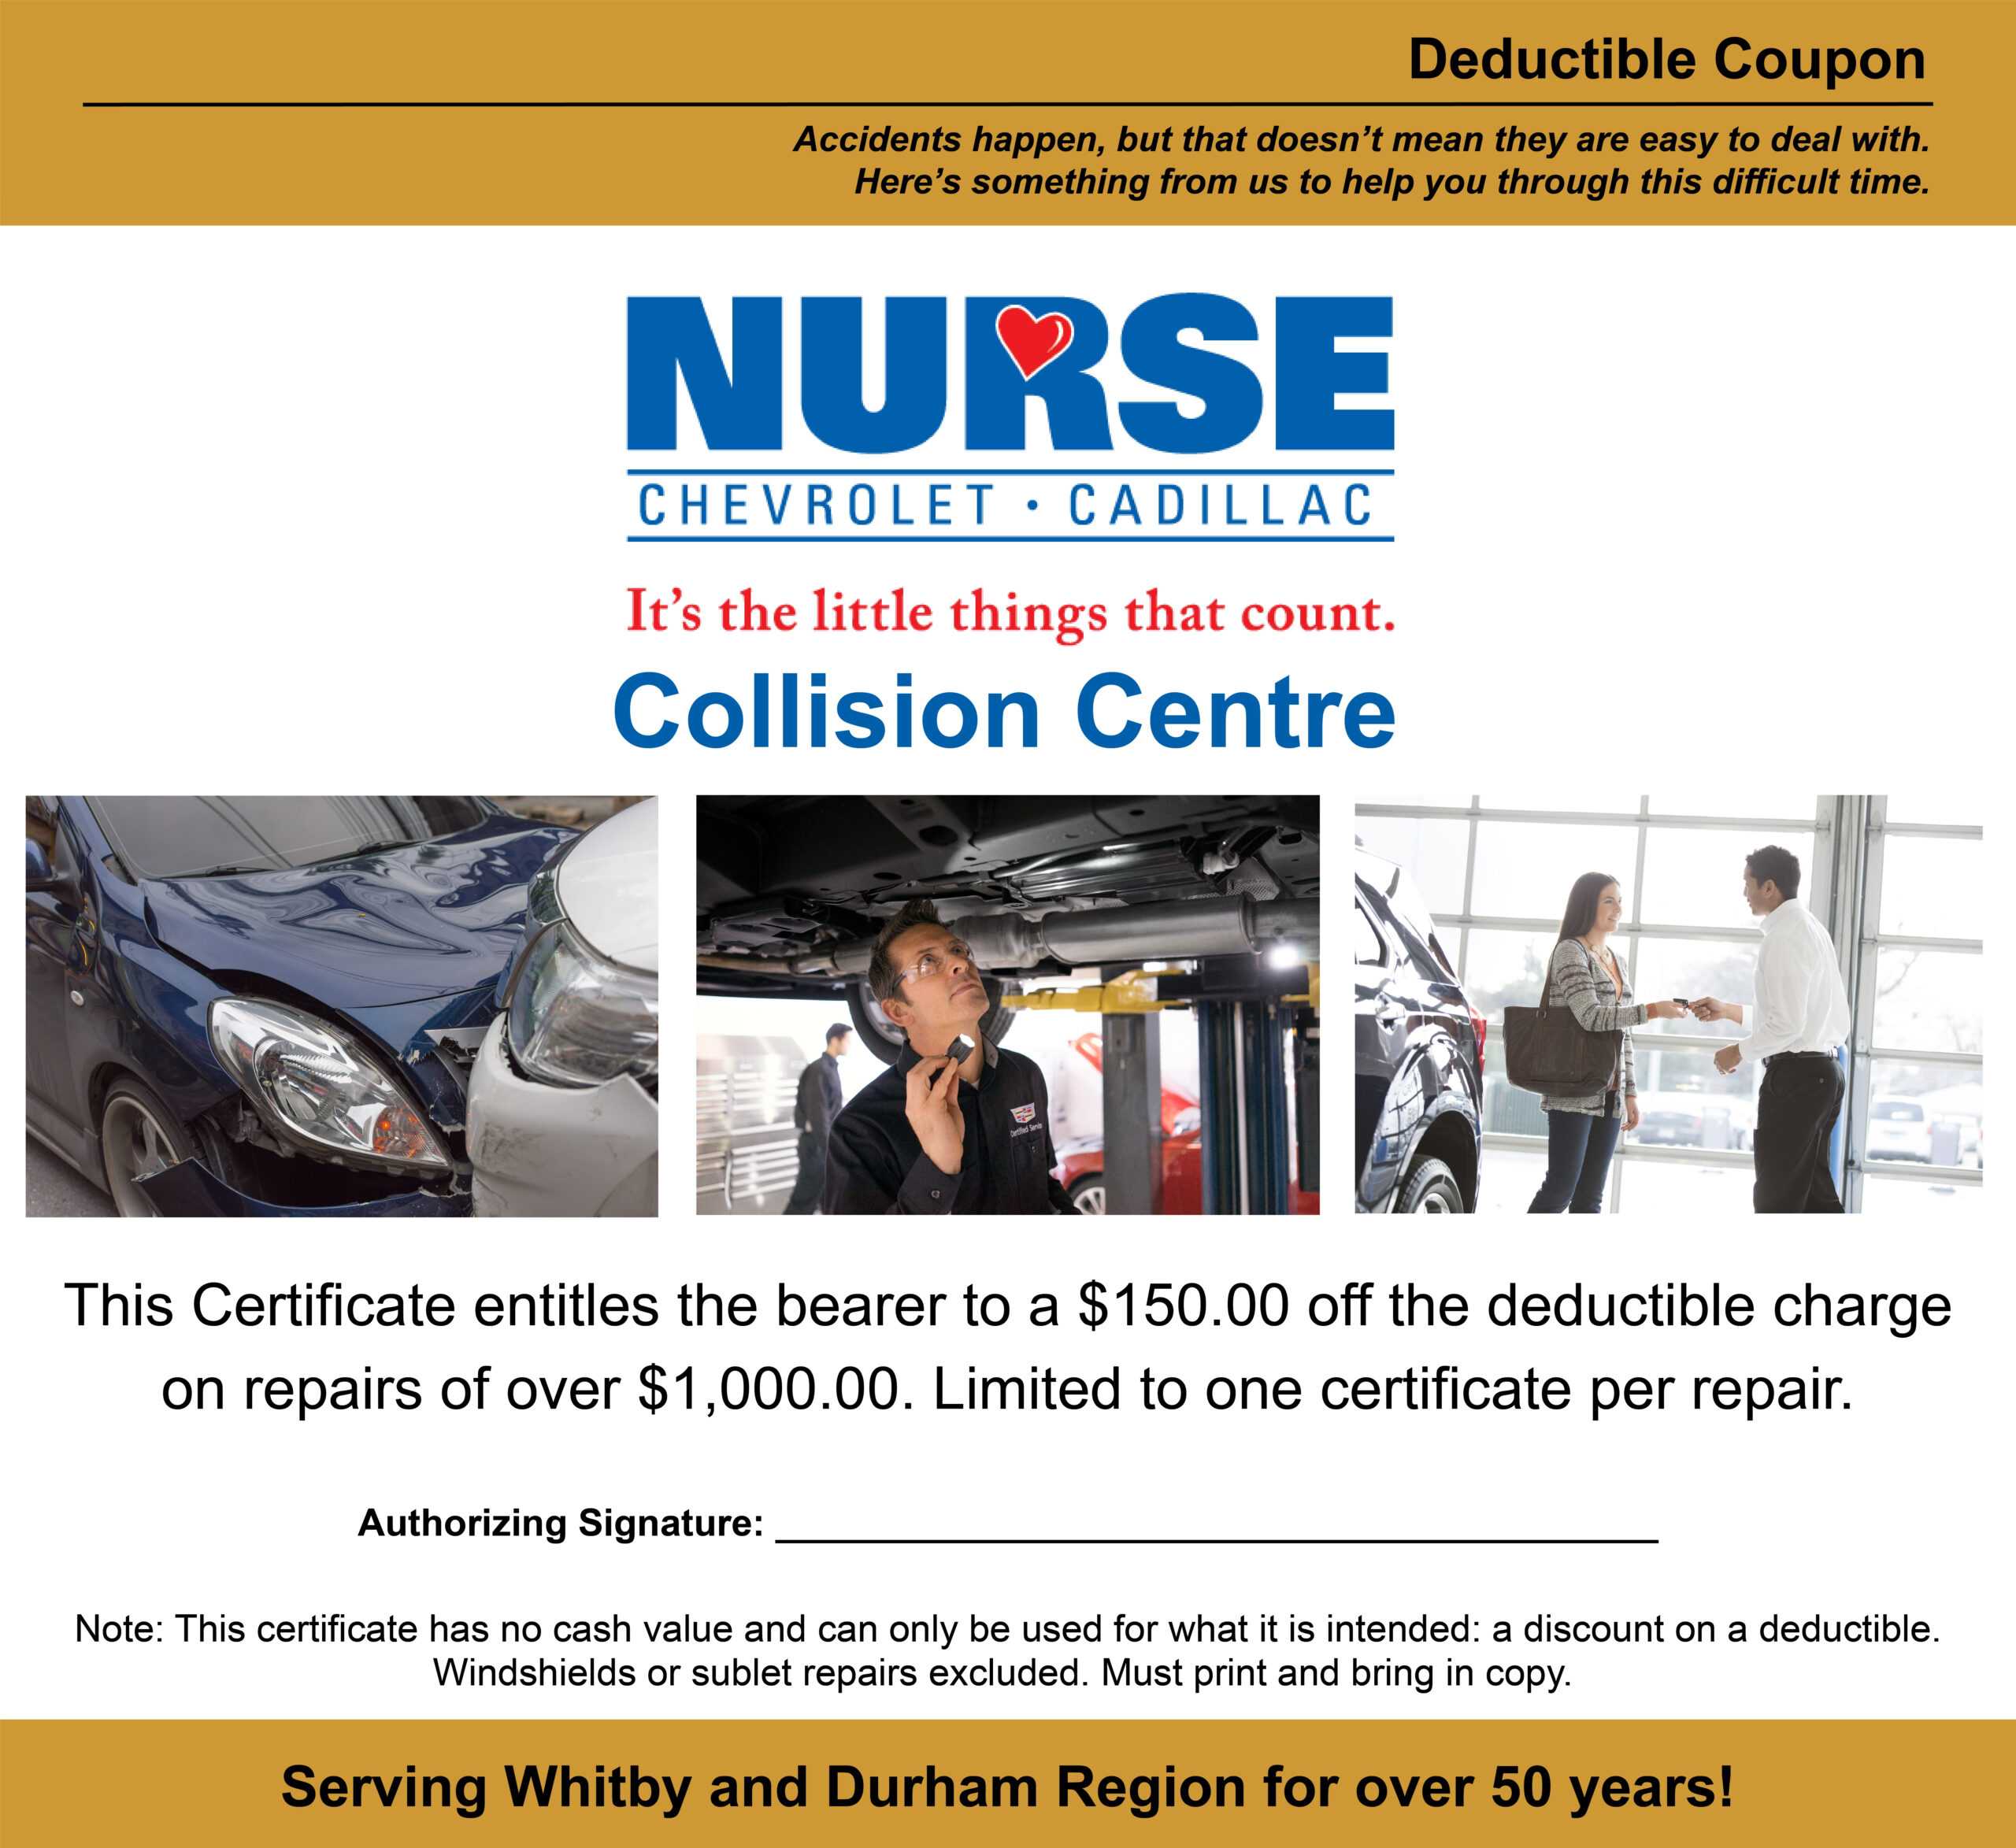 Exclusive Offers | Nurse Chevrolet Cadillac Within This Certificate Entitles The Bearer Template